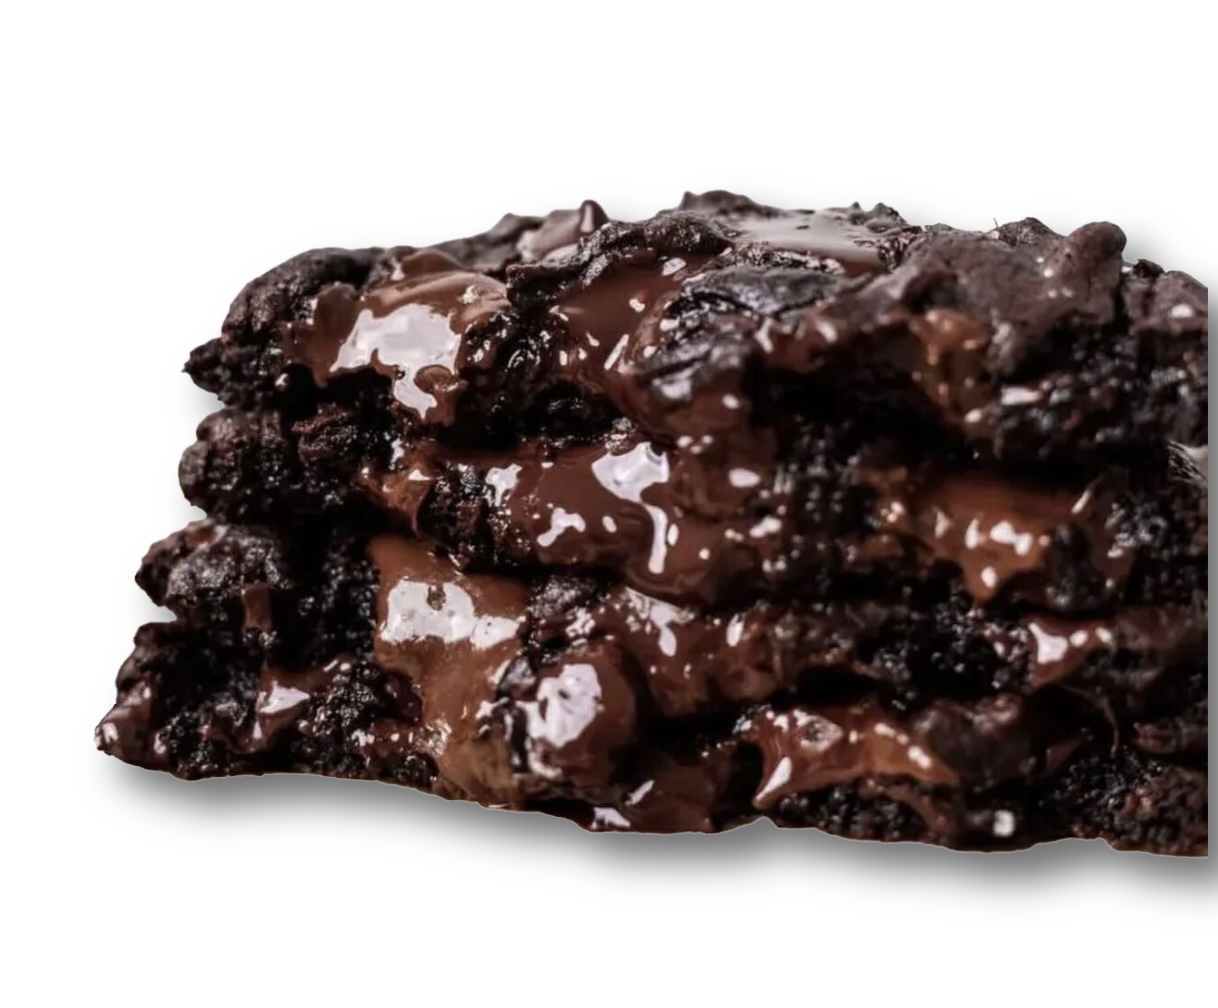 A close up of some chocolate covered cookies